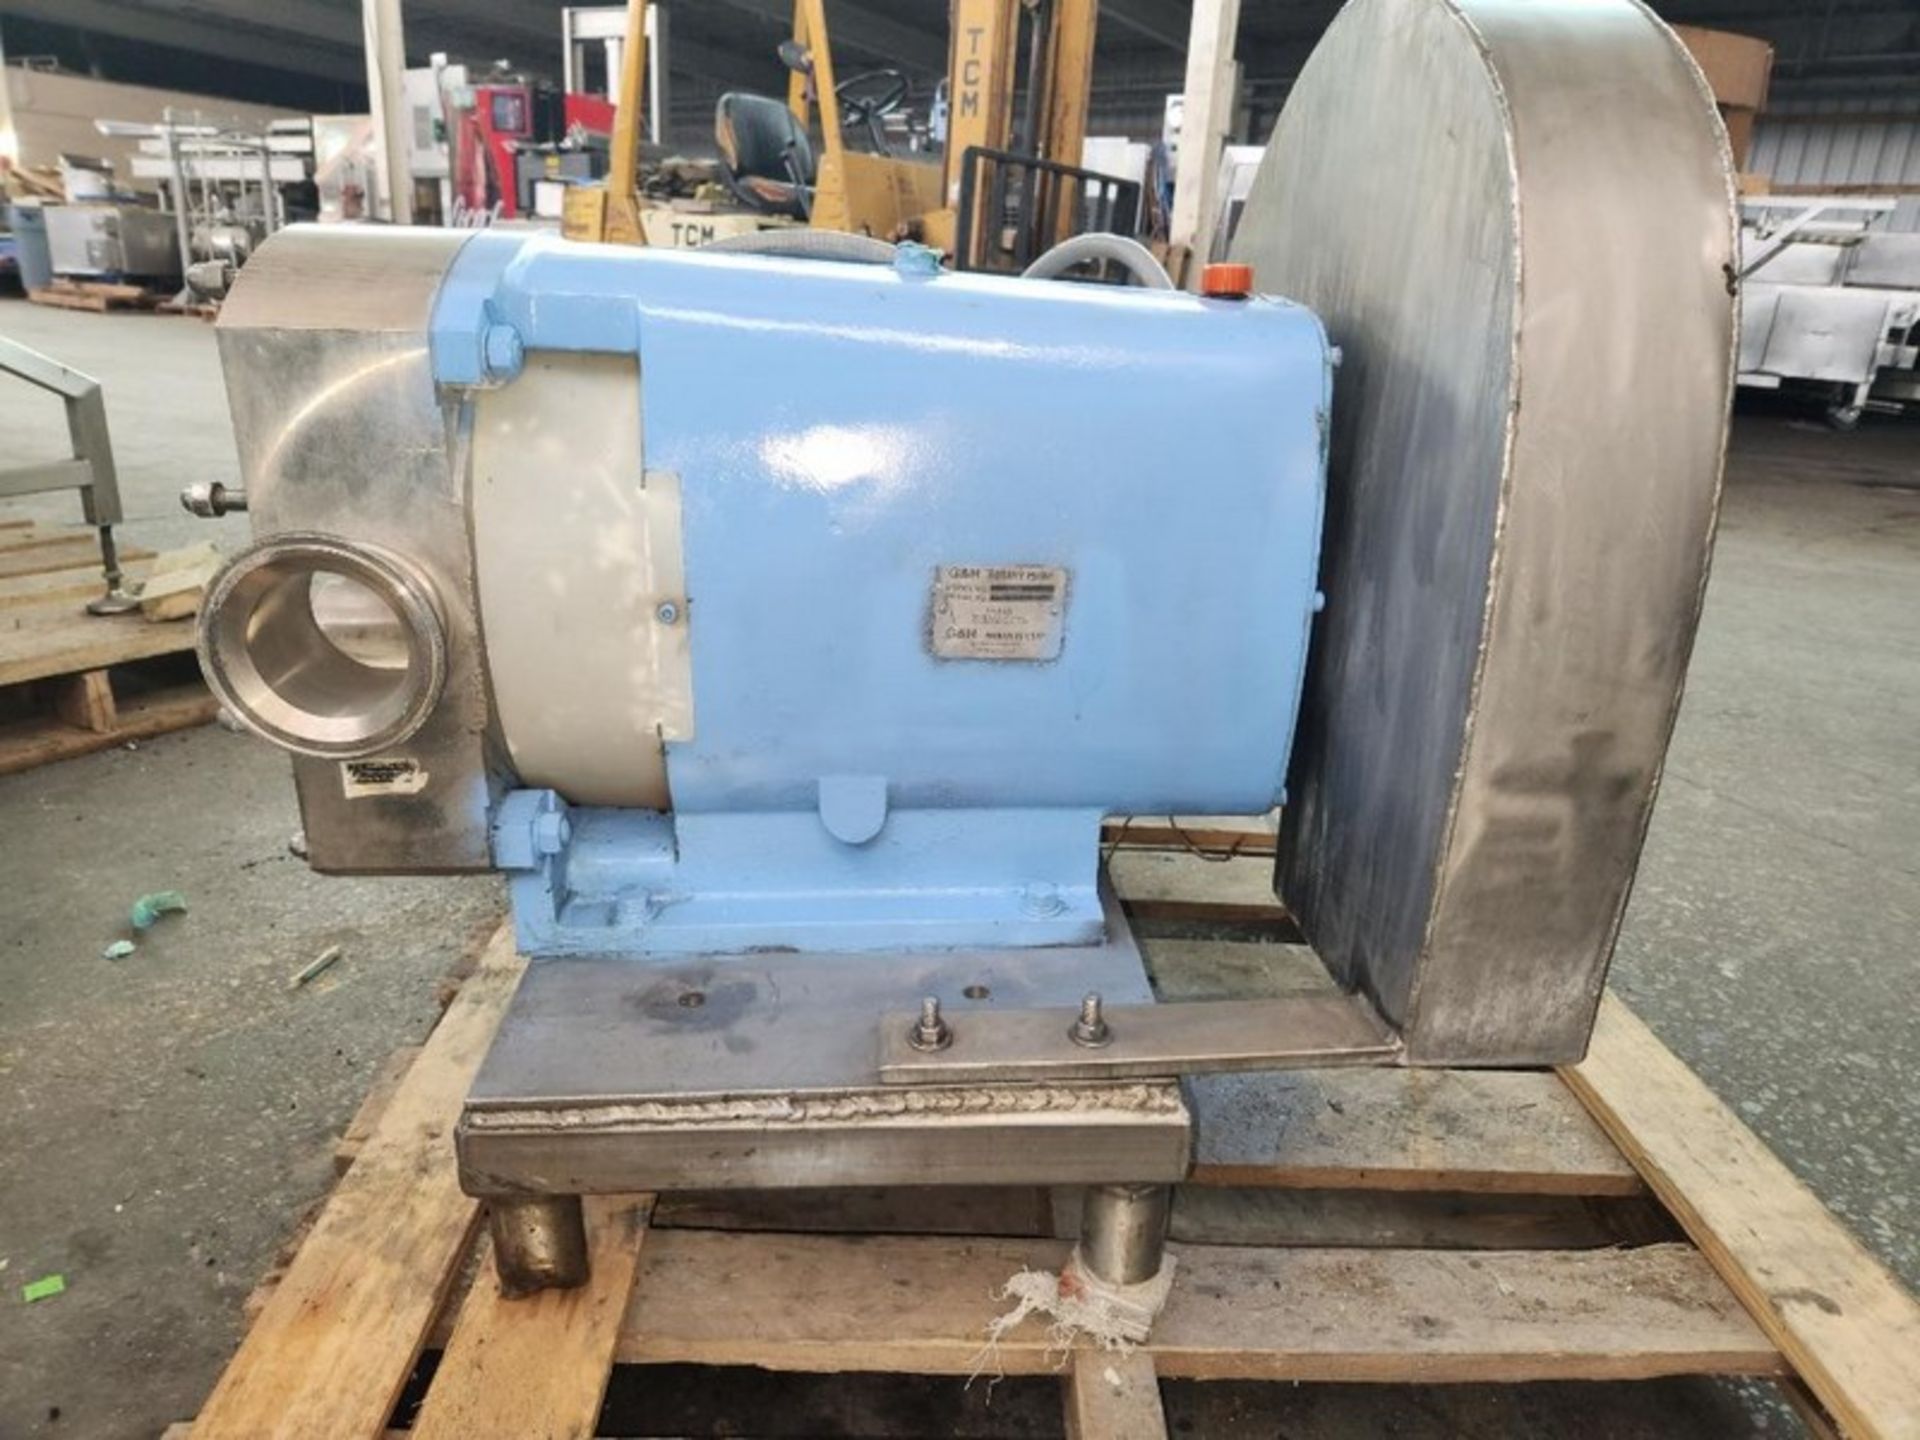 G H (Alfa Laval) 7.5 hp 4" S/S Sanitary Positive Displacement Pump, Model 822, S/N 95-8-50174 with - Image 7 of 15